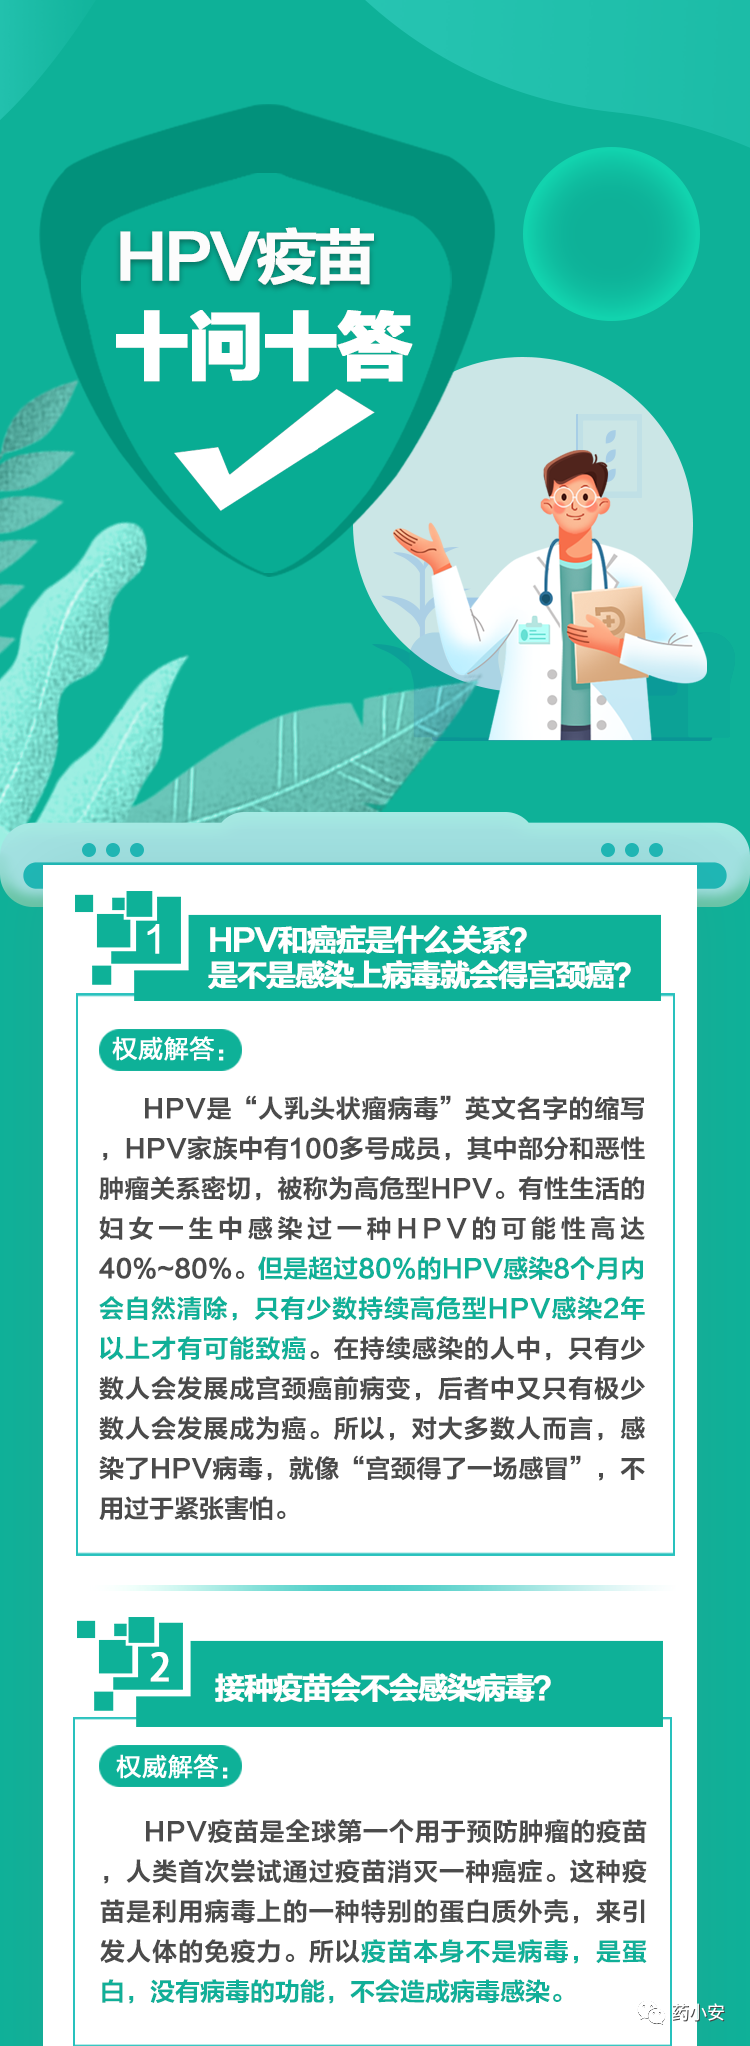 HPV is vaccinal 10 ask 10 answer